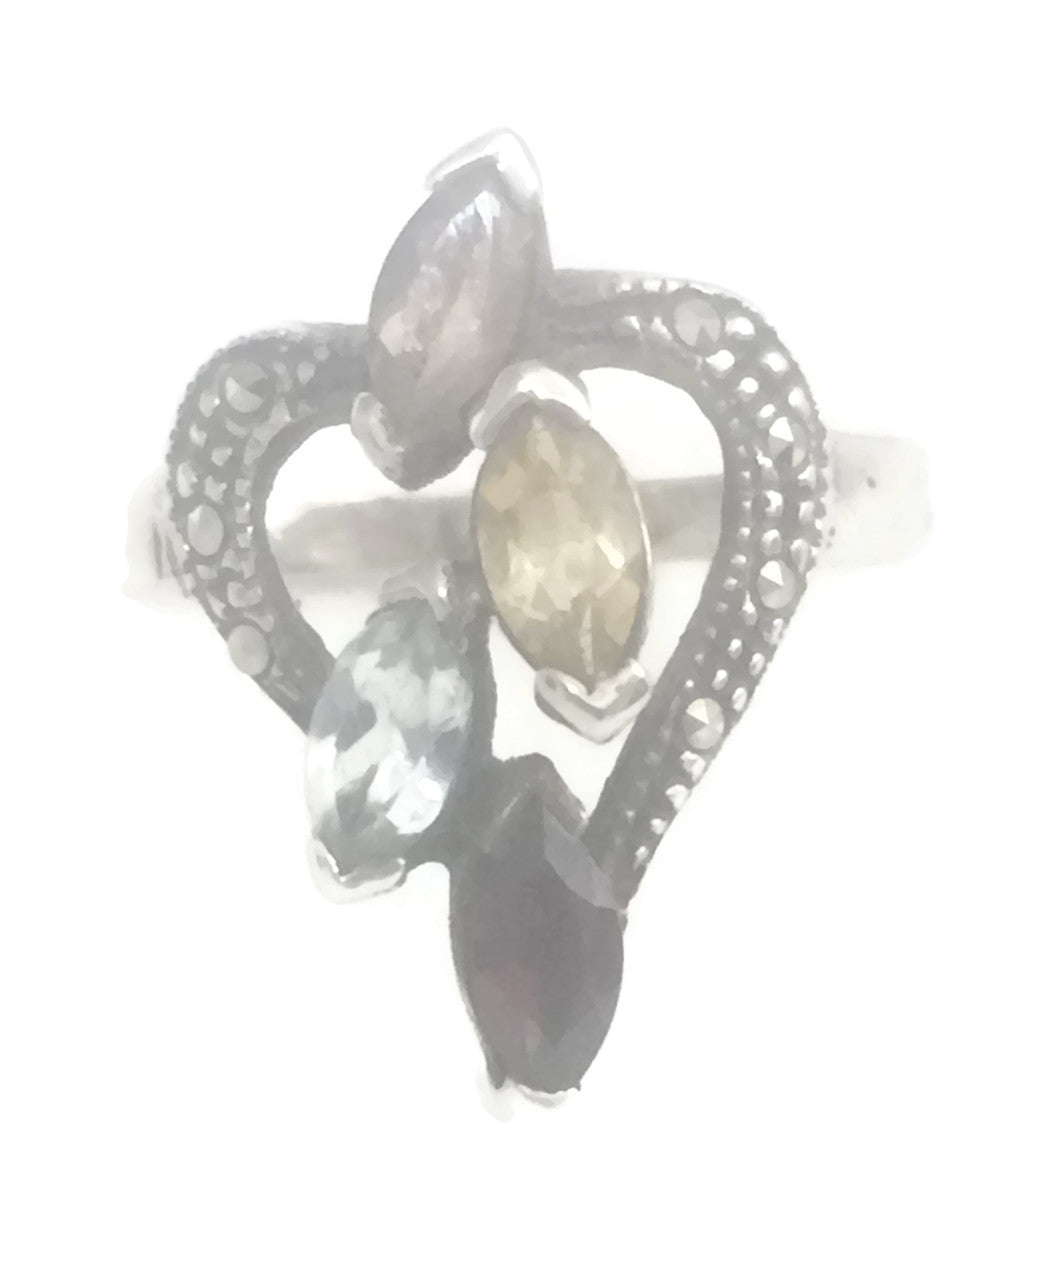 Heart Ring Marcasite Topaz Citrine Sterling Silver Ring Size 6.75